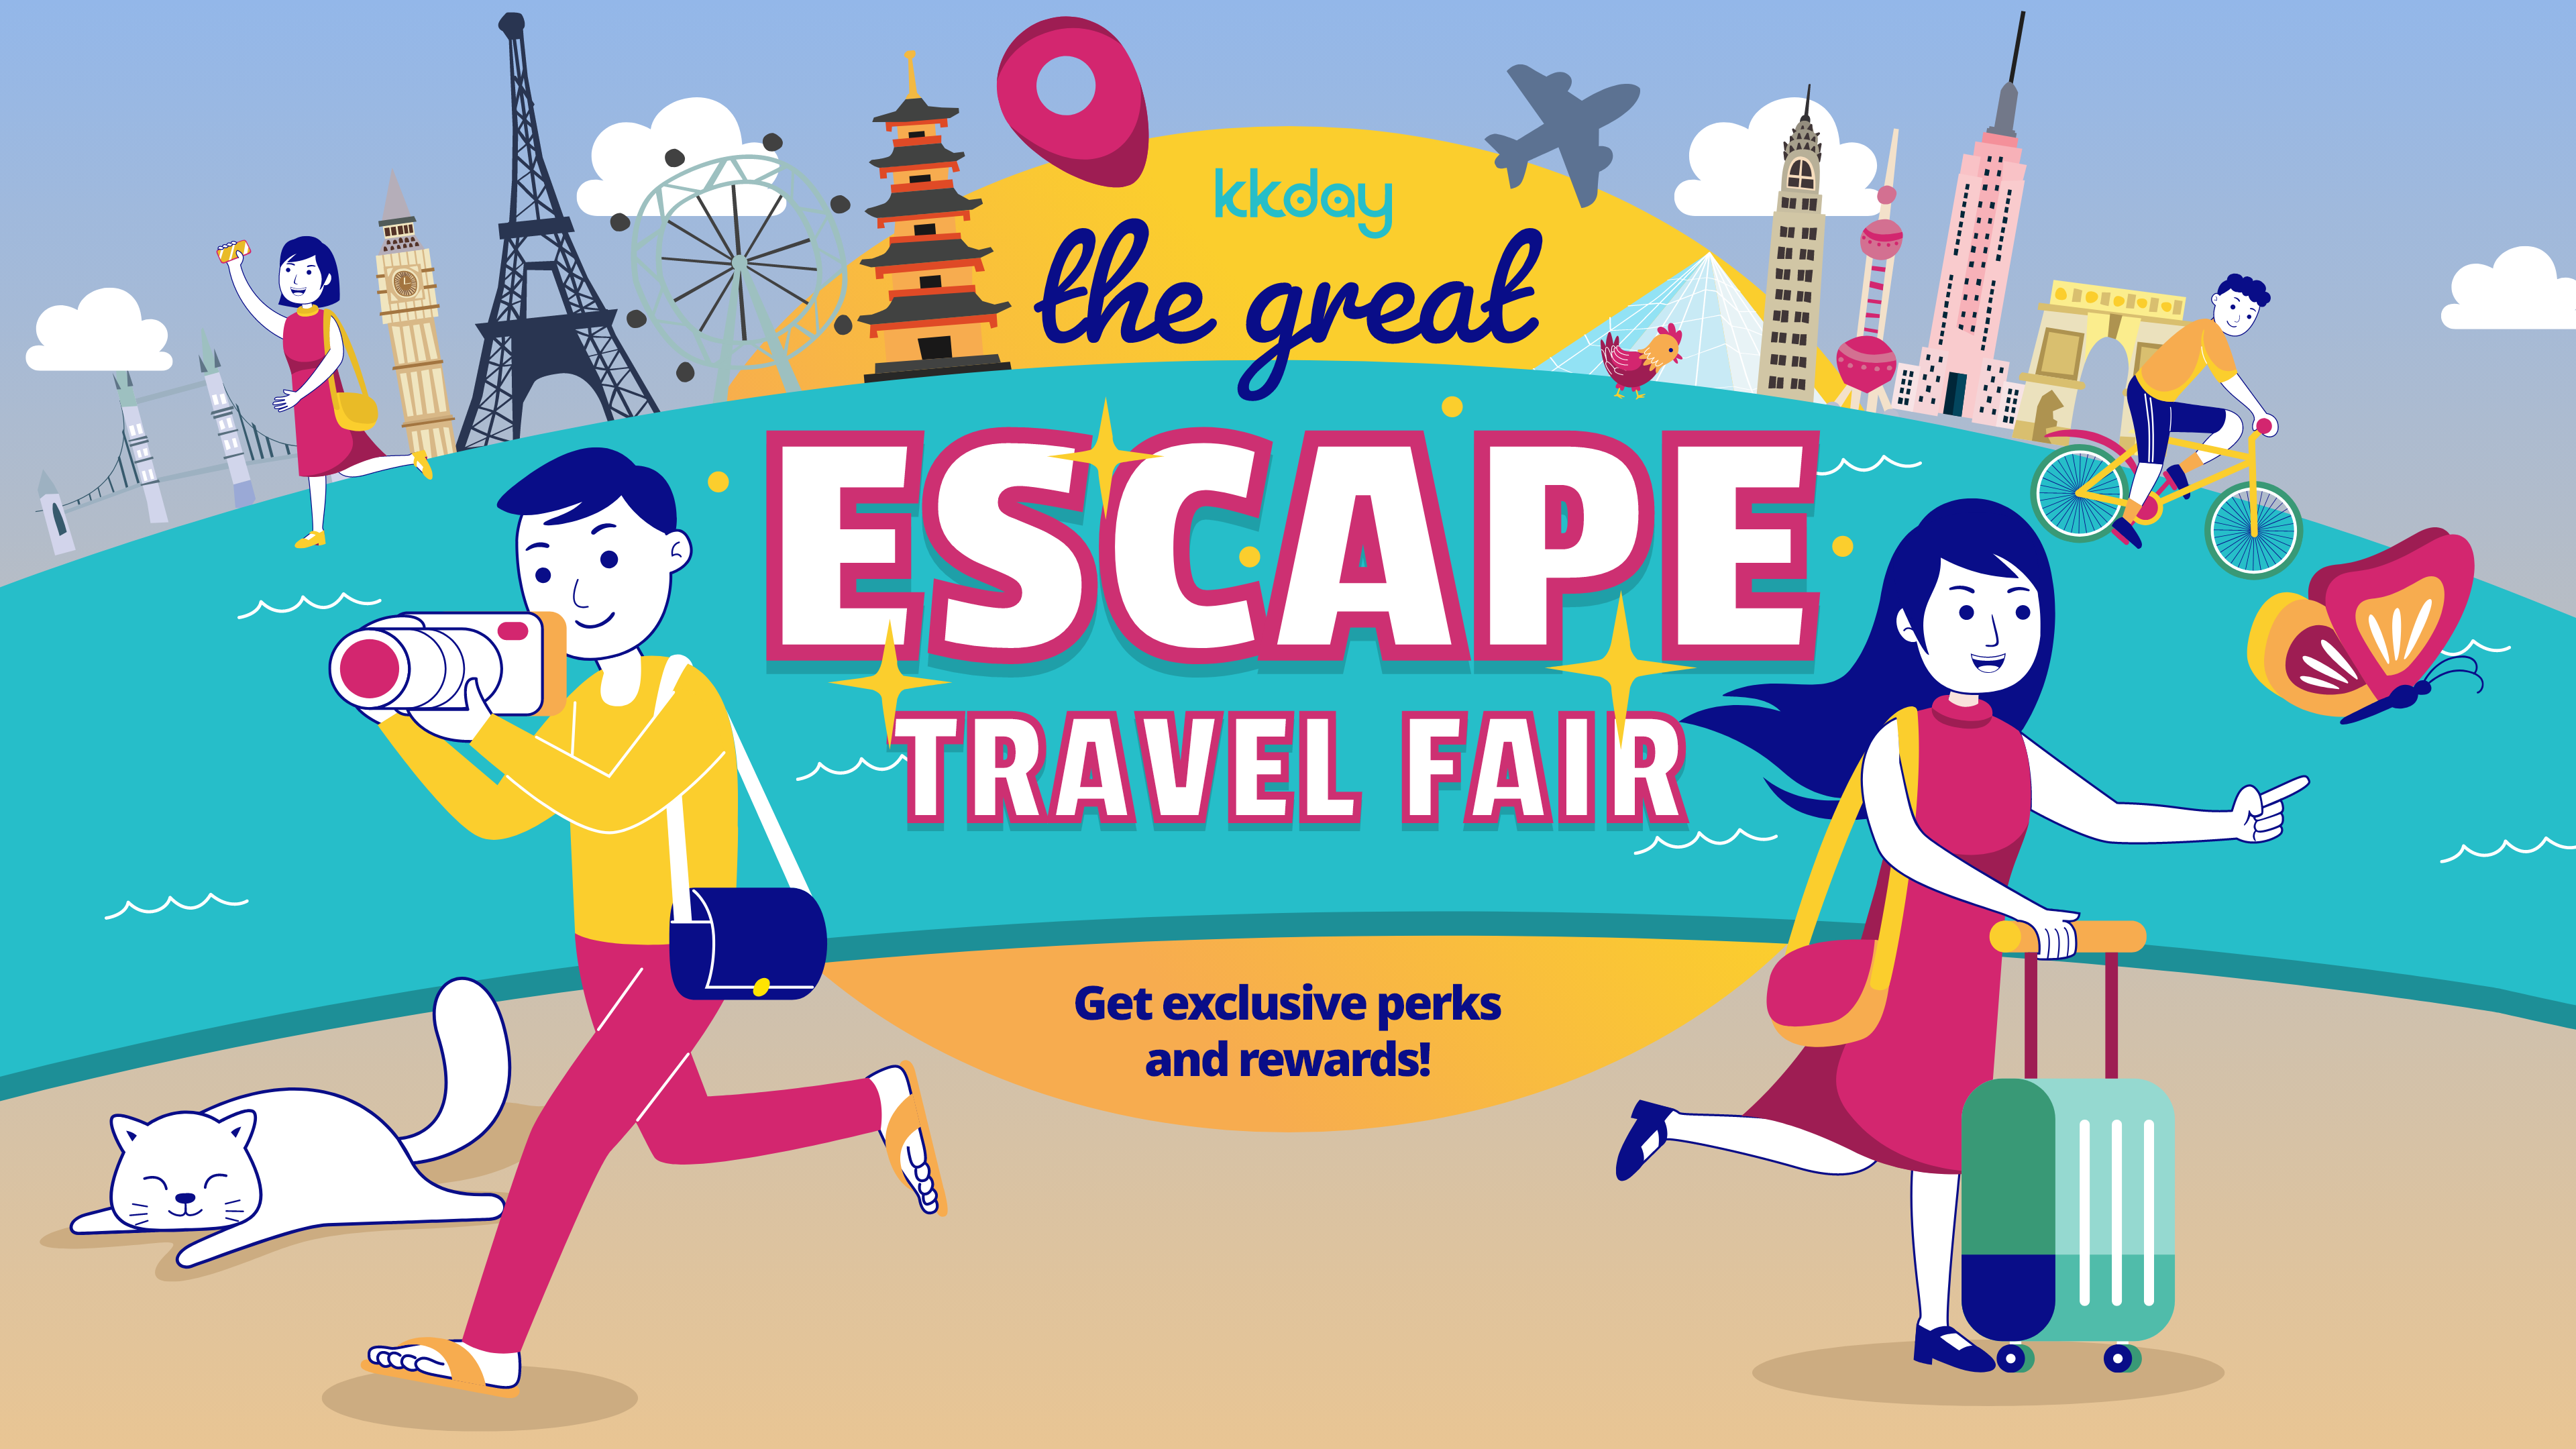 KKday’s online travel fair offers exclusive deals & discounts of up to